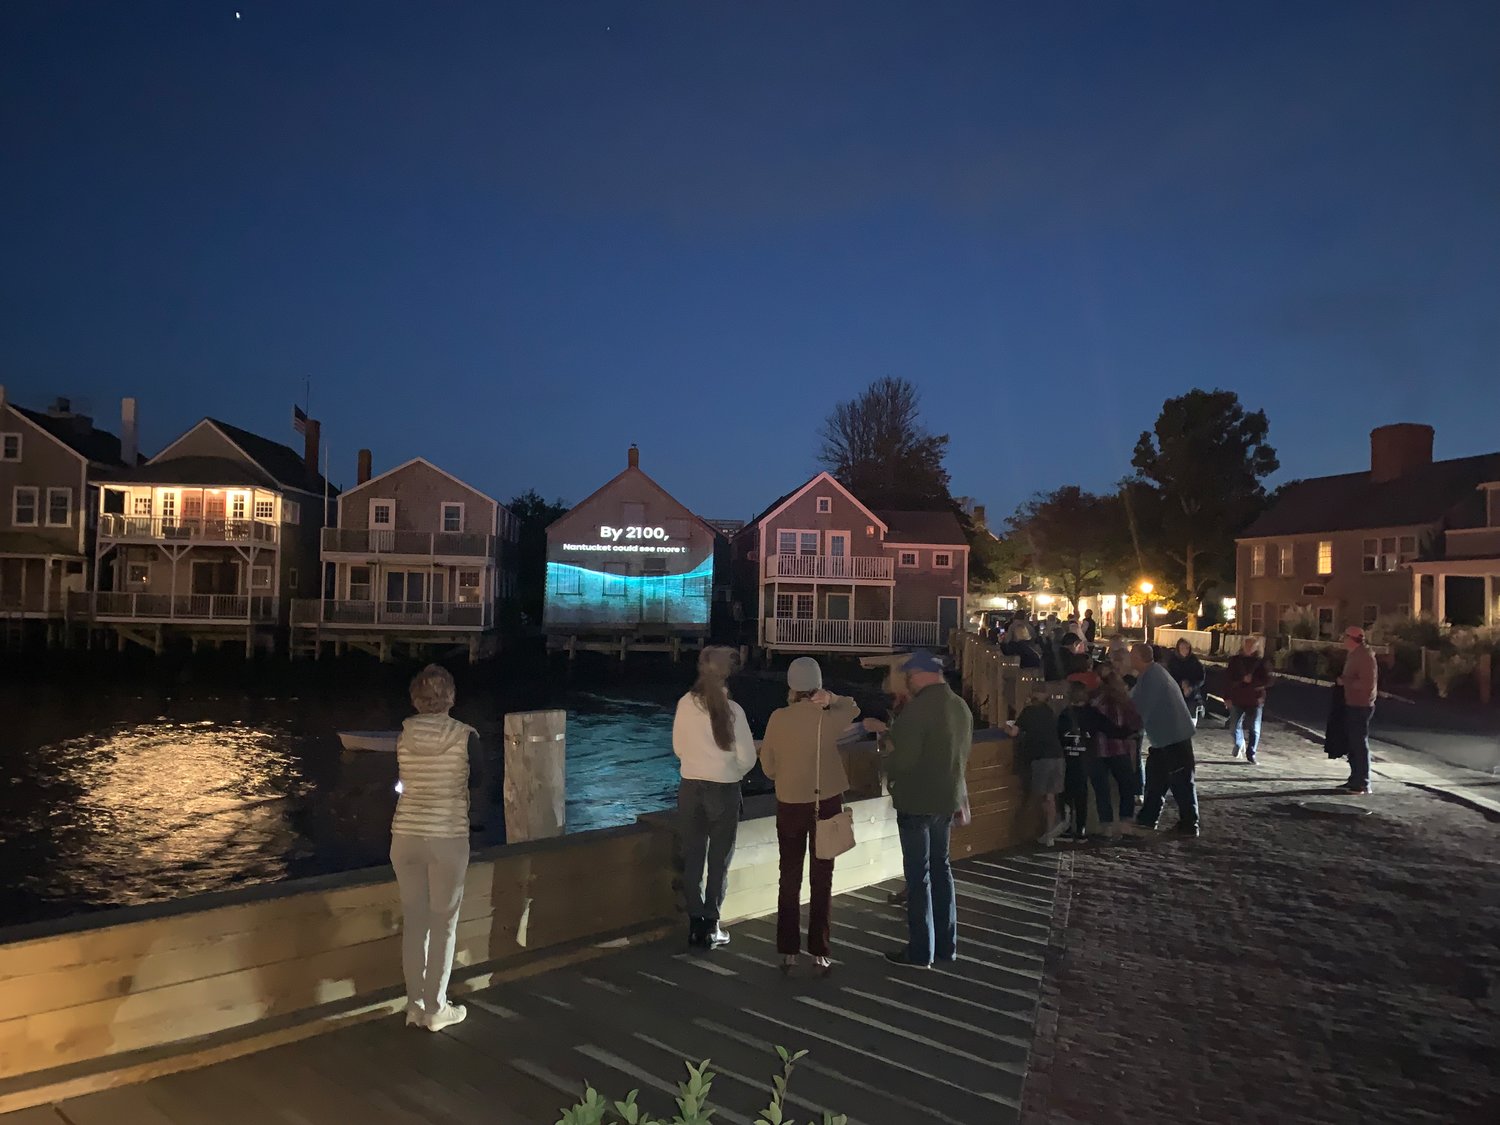 A pop-up art installation was unveiled Friday on the exterior of 4 Old North Wharf to raise awareness of coastal-resilience and climate change.